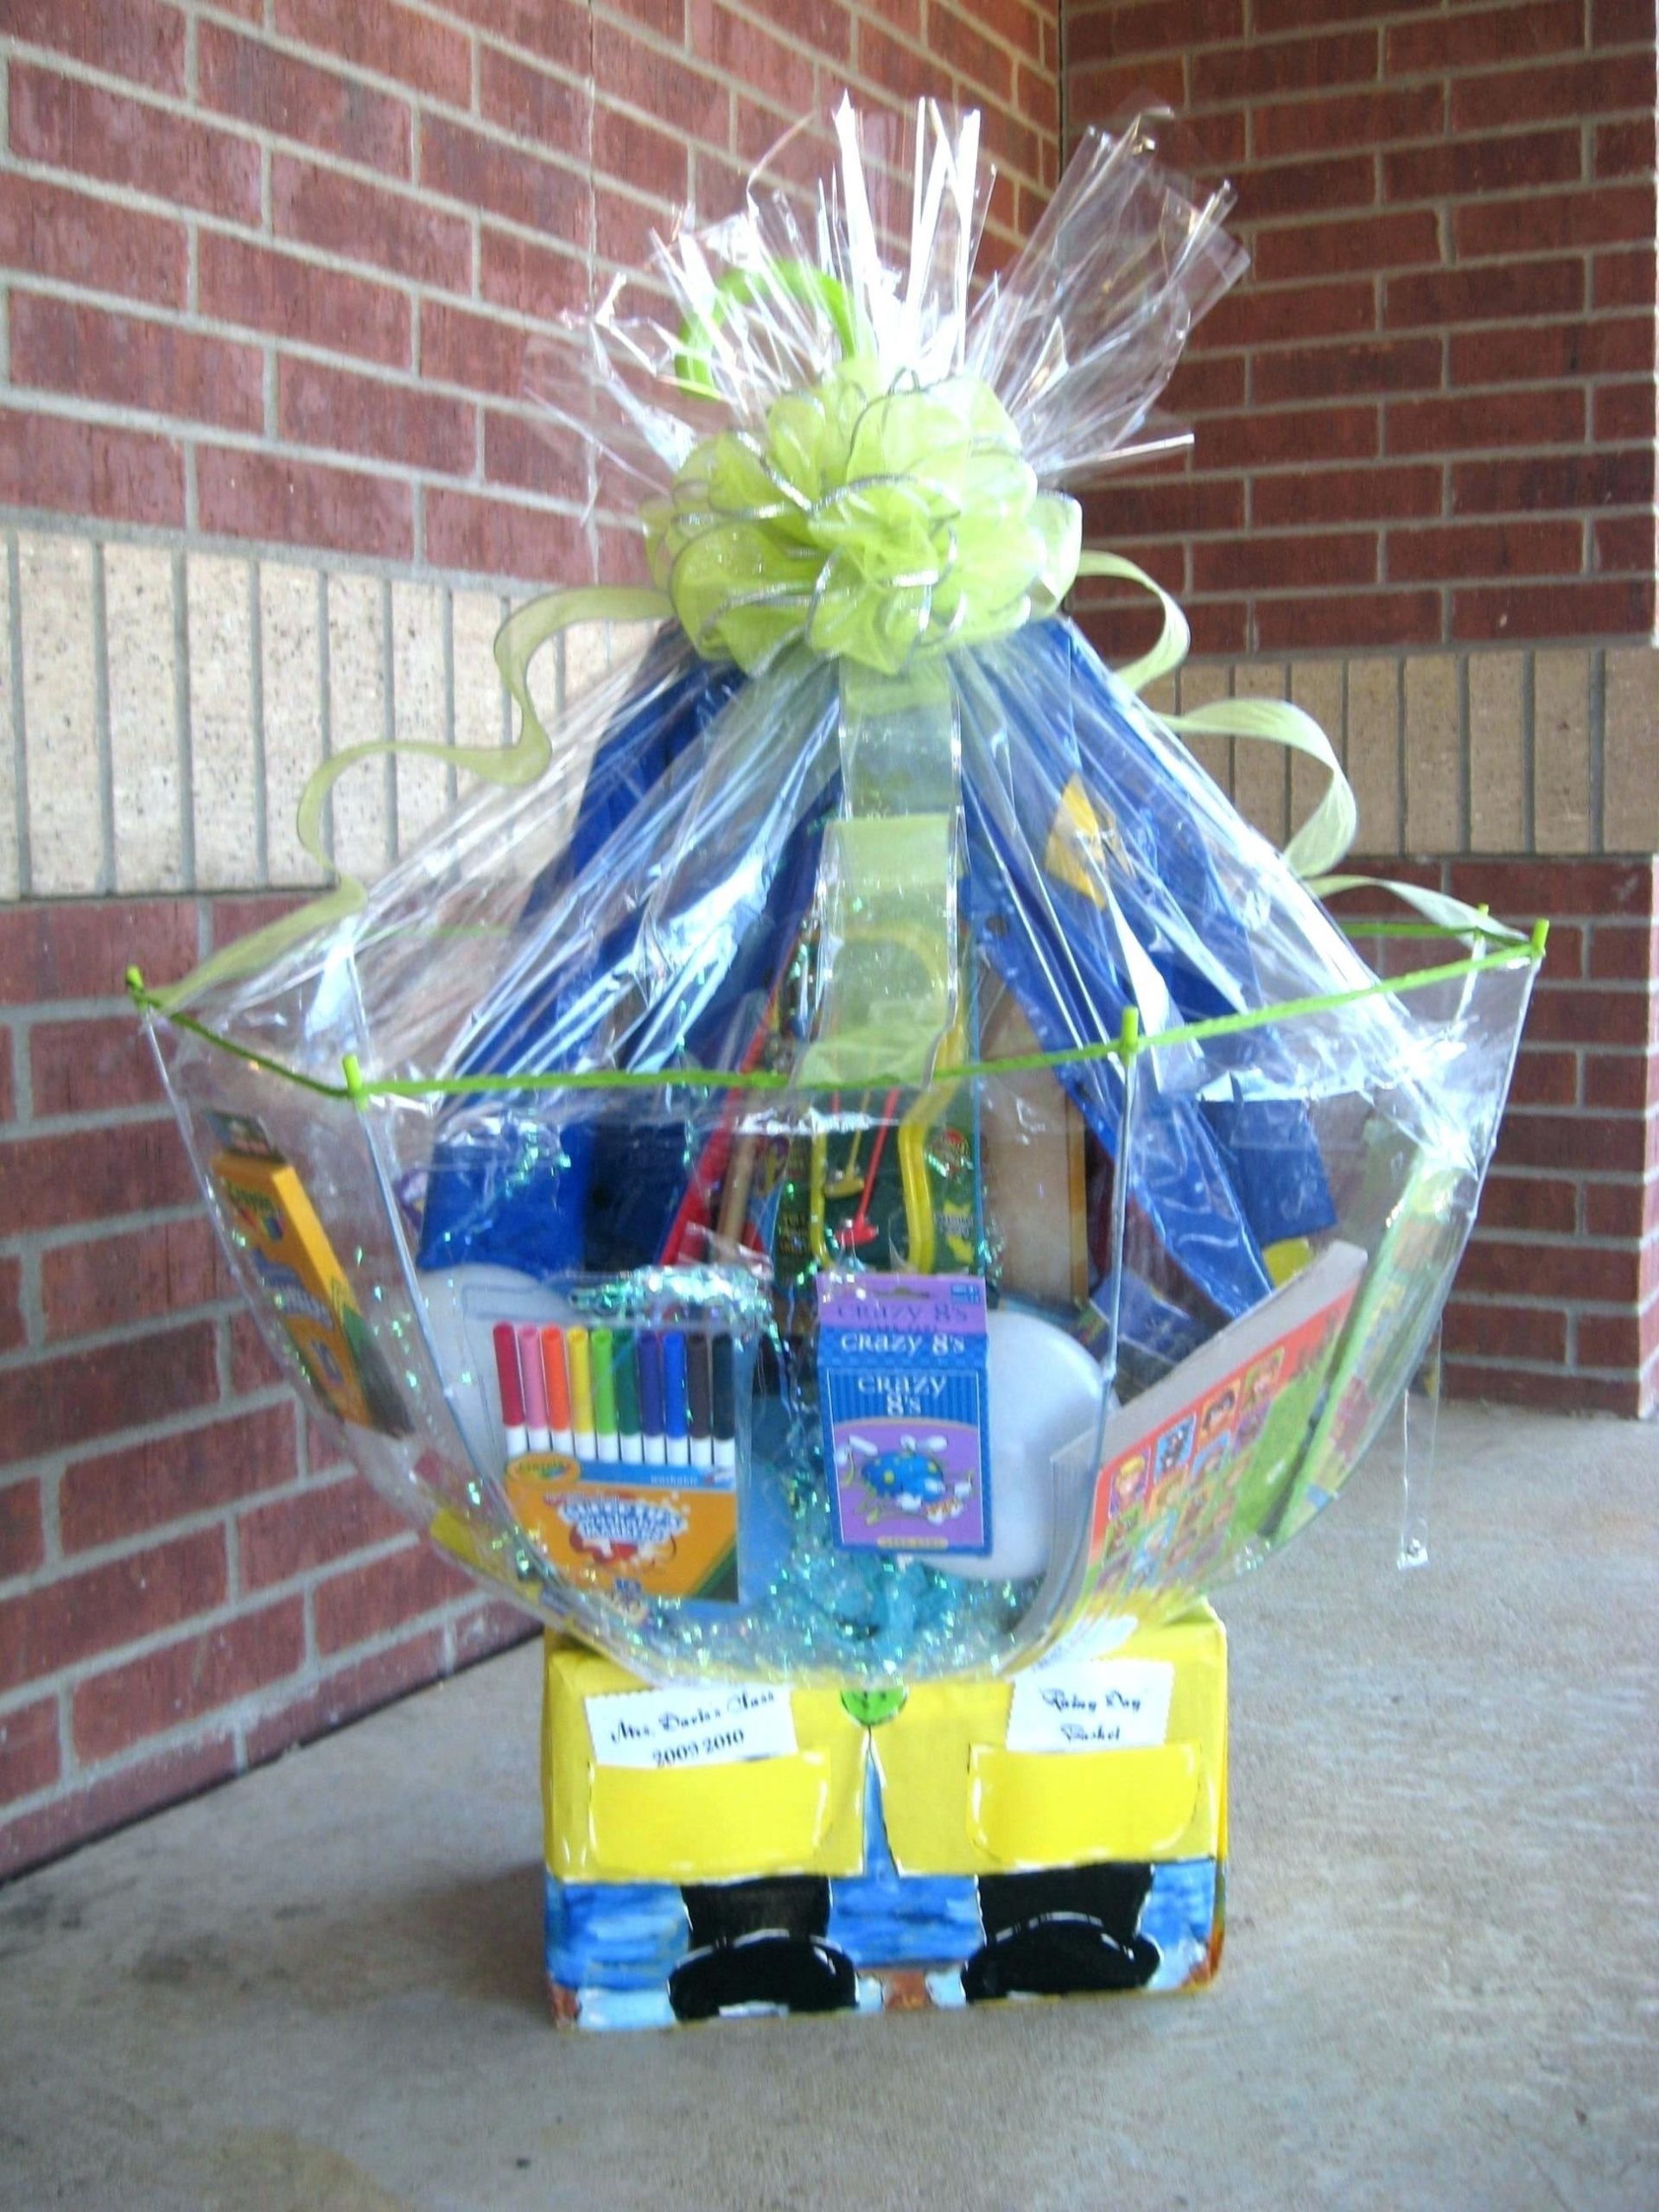 Gift Basket Ideas For Auction
 10 Cute Silent Auction Gift Basket Ideas 2019